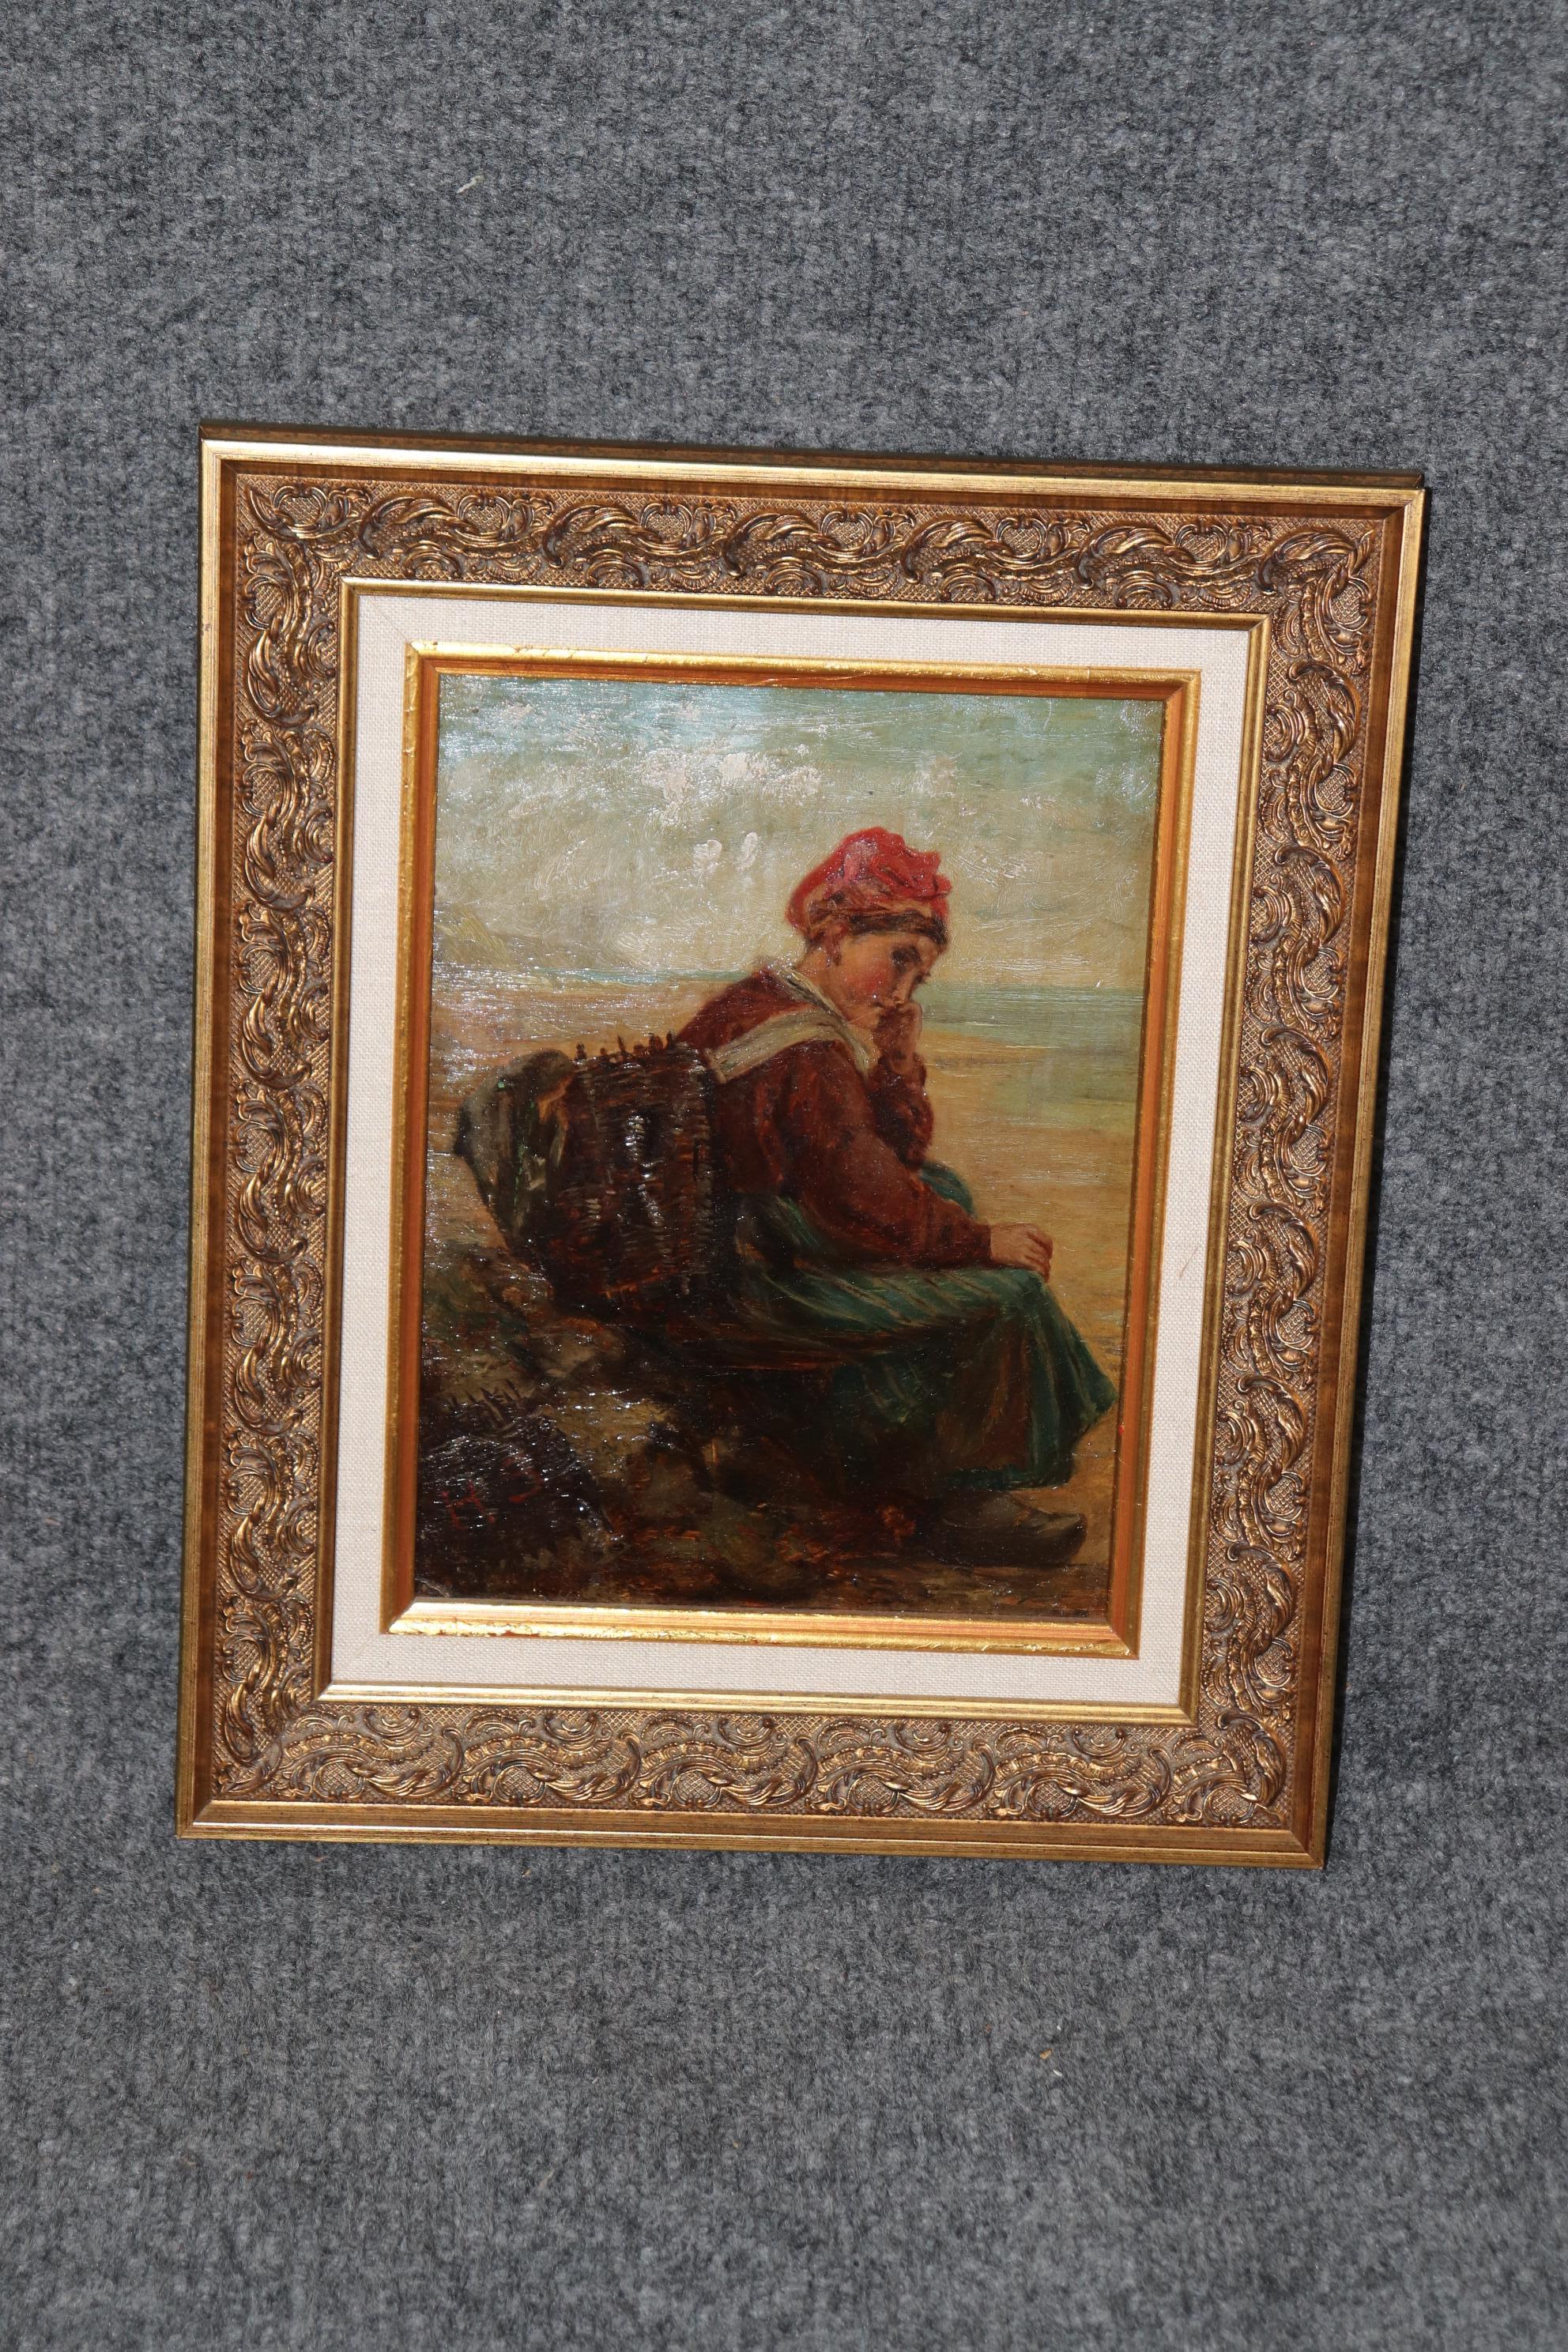 This is a beautifully framed and matted oil on board painting of a young woman apparrently collecting objects on a beach. The woman is dresser in what I believe are Arab clothes and has a bag and interesting shoes. The painting is signed H.S.